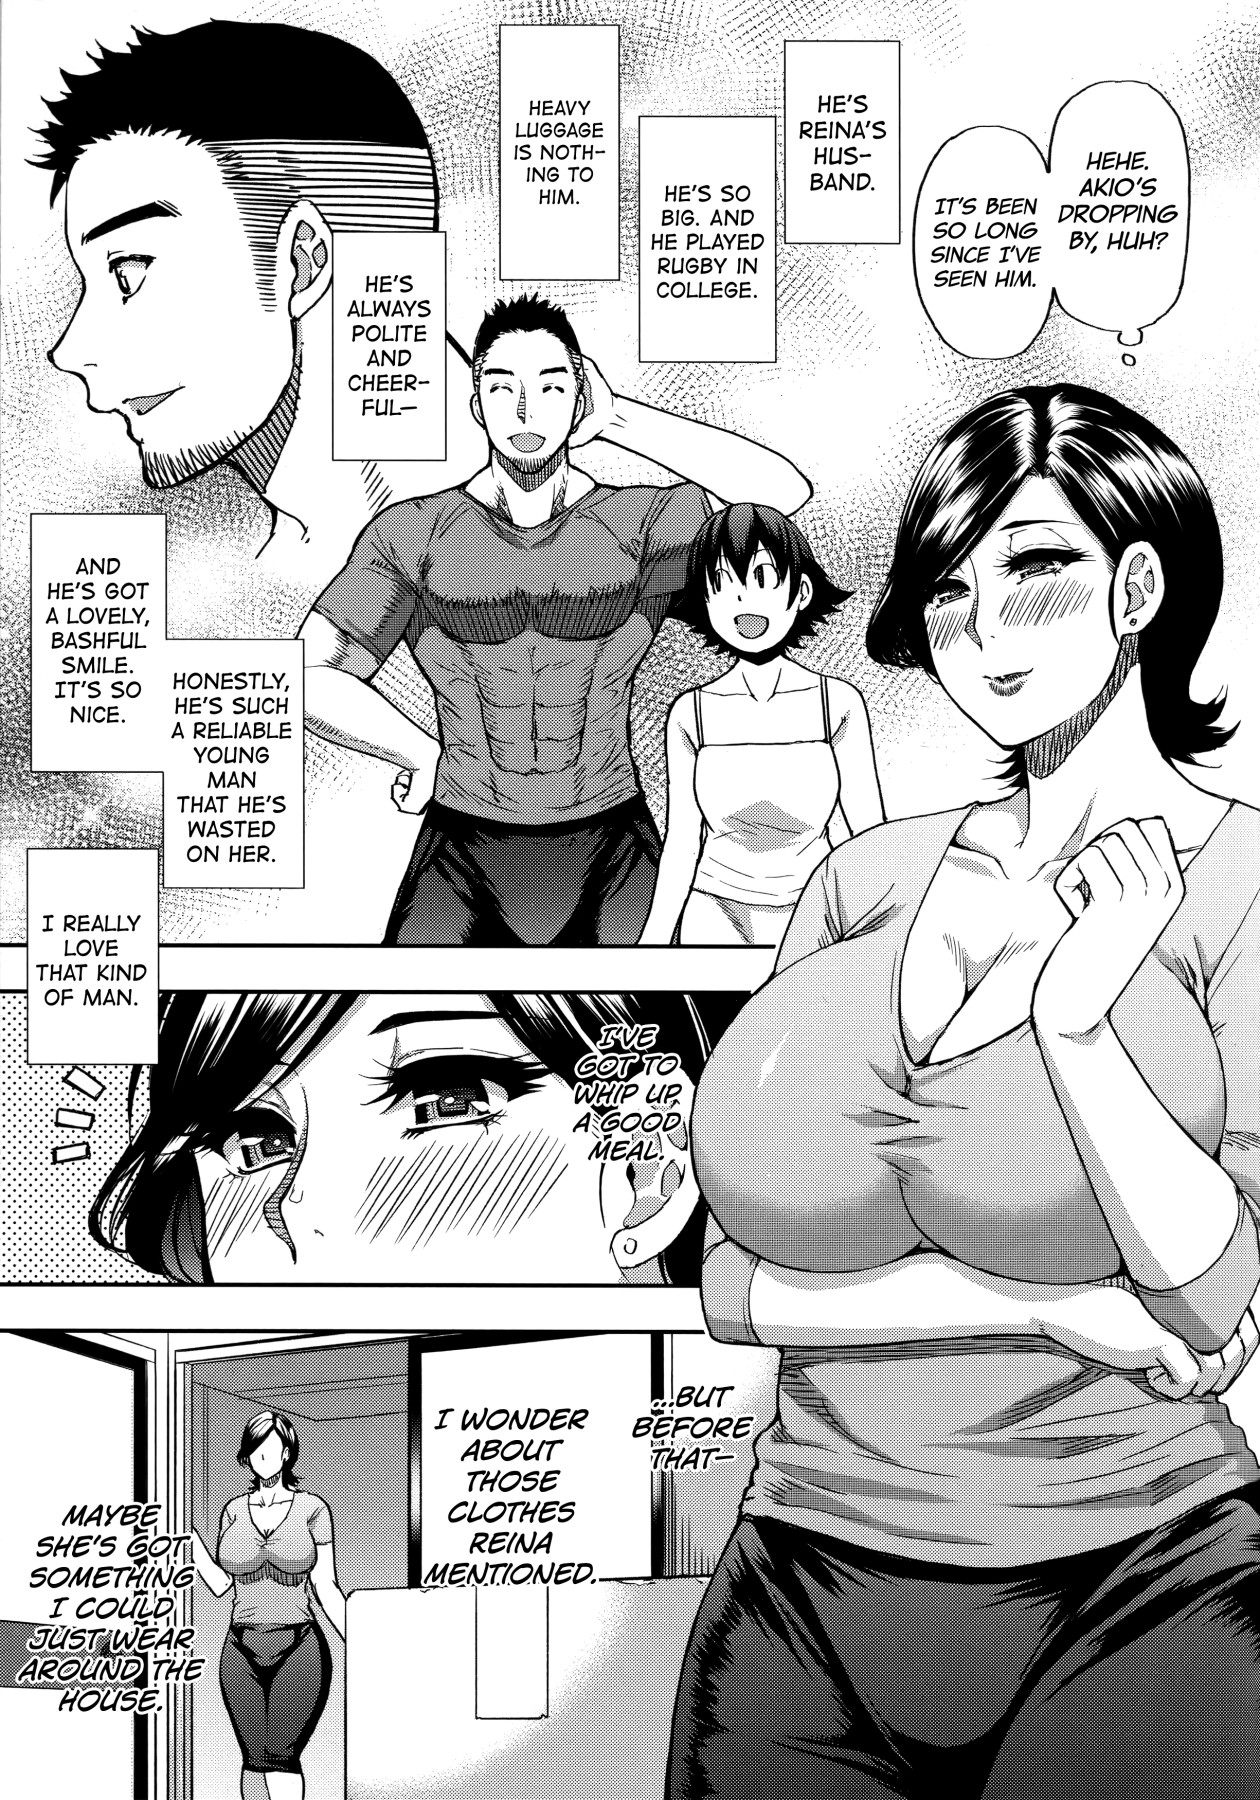 Hentai Manga Comic-Do Anything You Like To Me In Her Place-Chapter 1-3